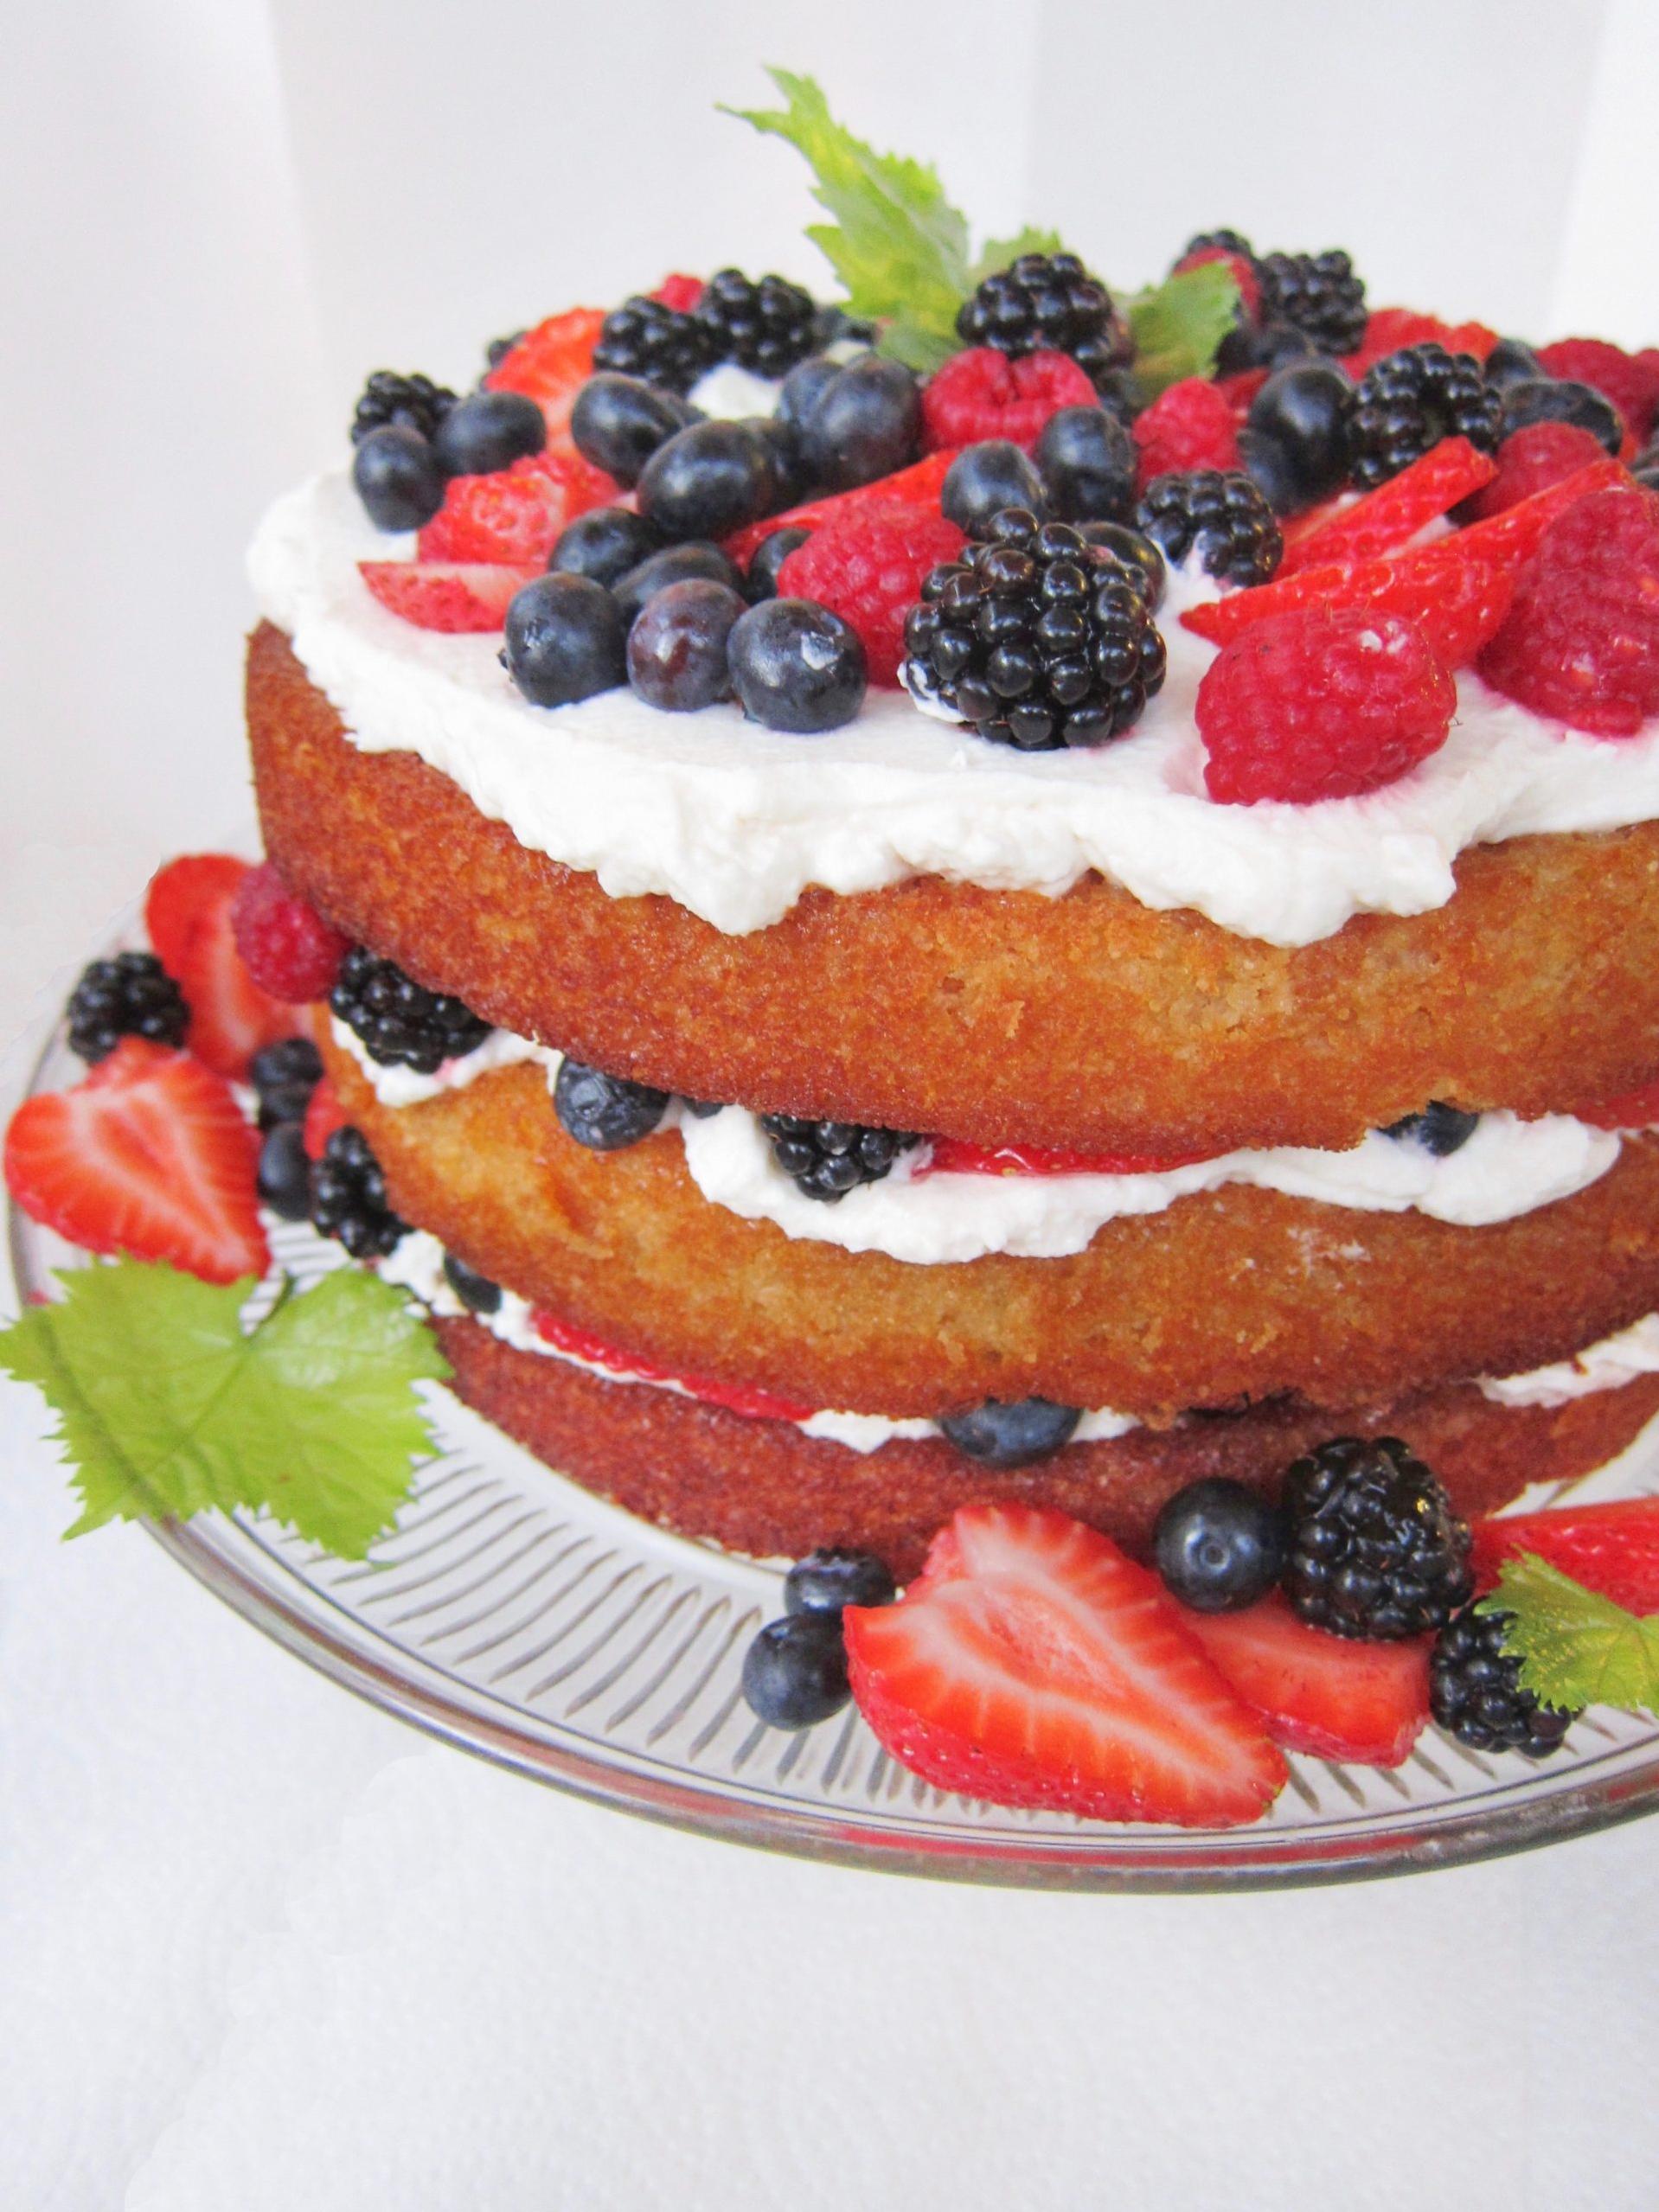  This recipe is perfect for a summer afternoon tea party, or even as a refreshing dessert.